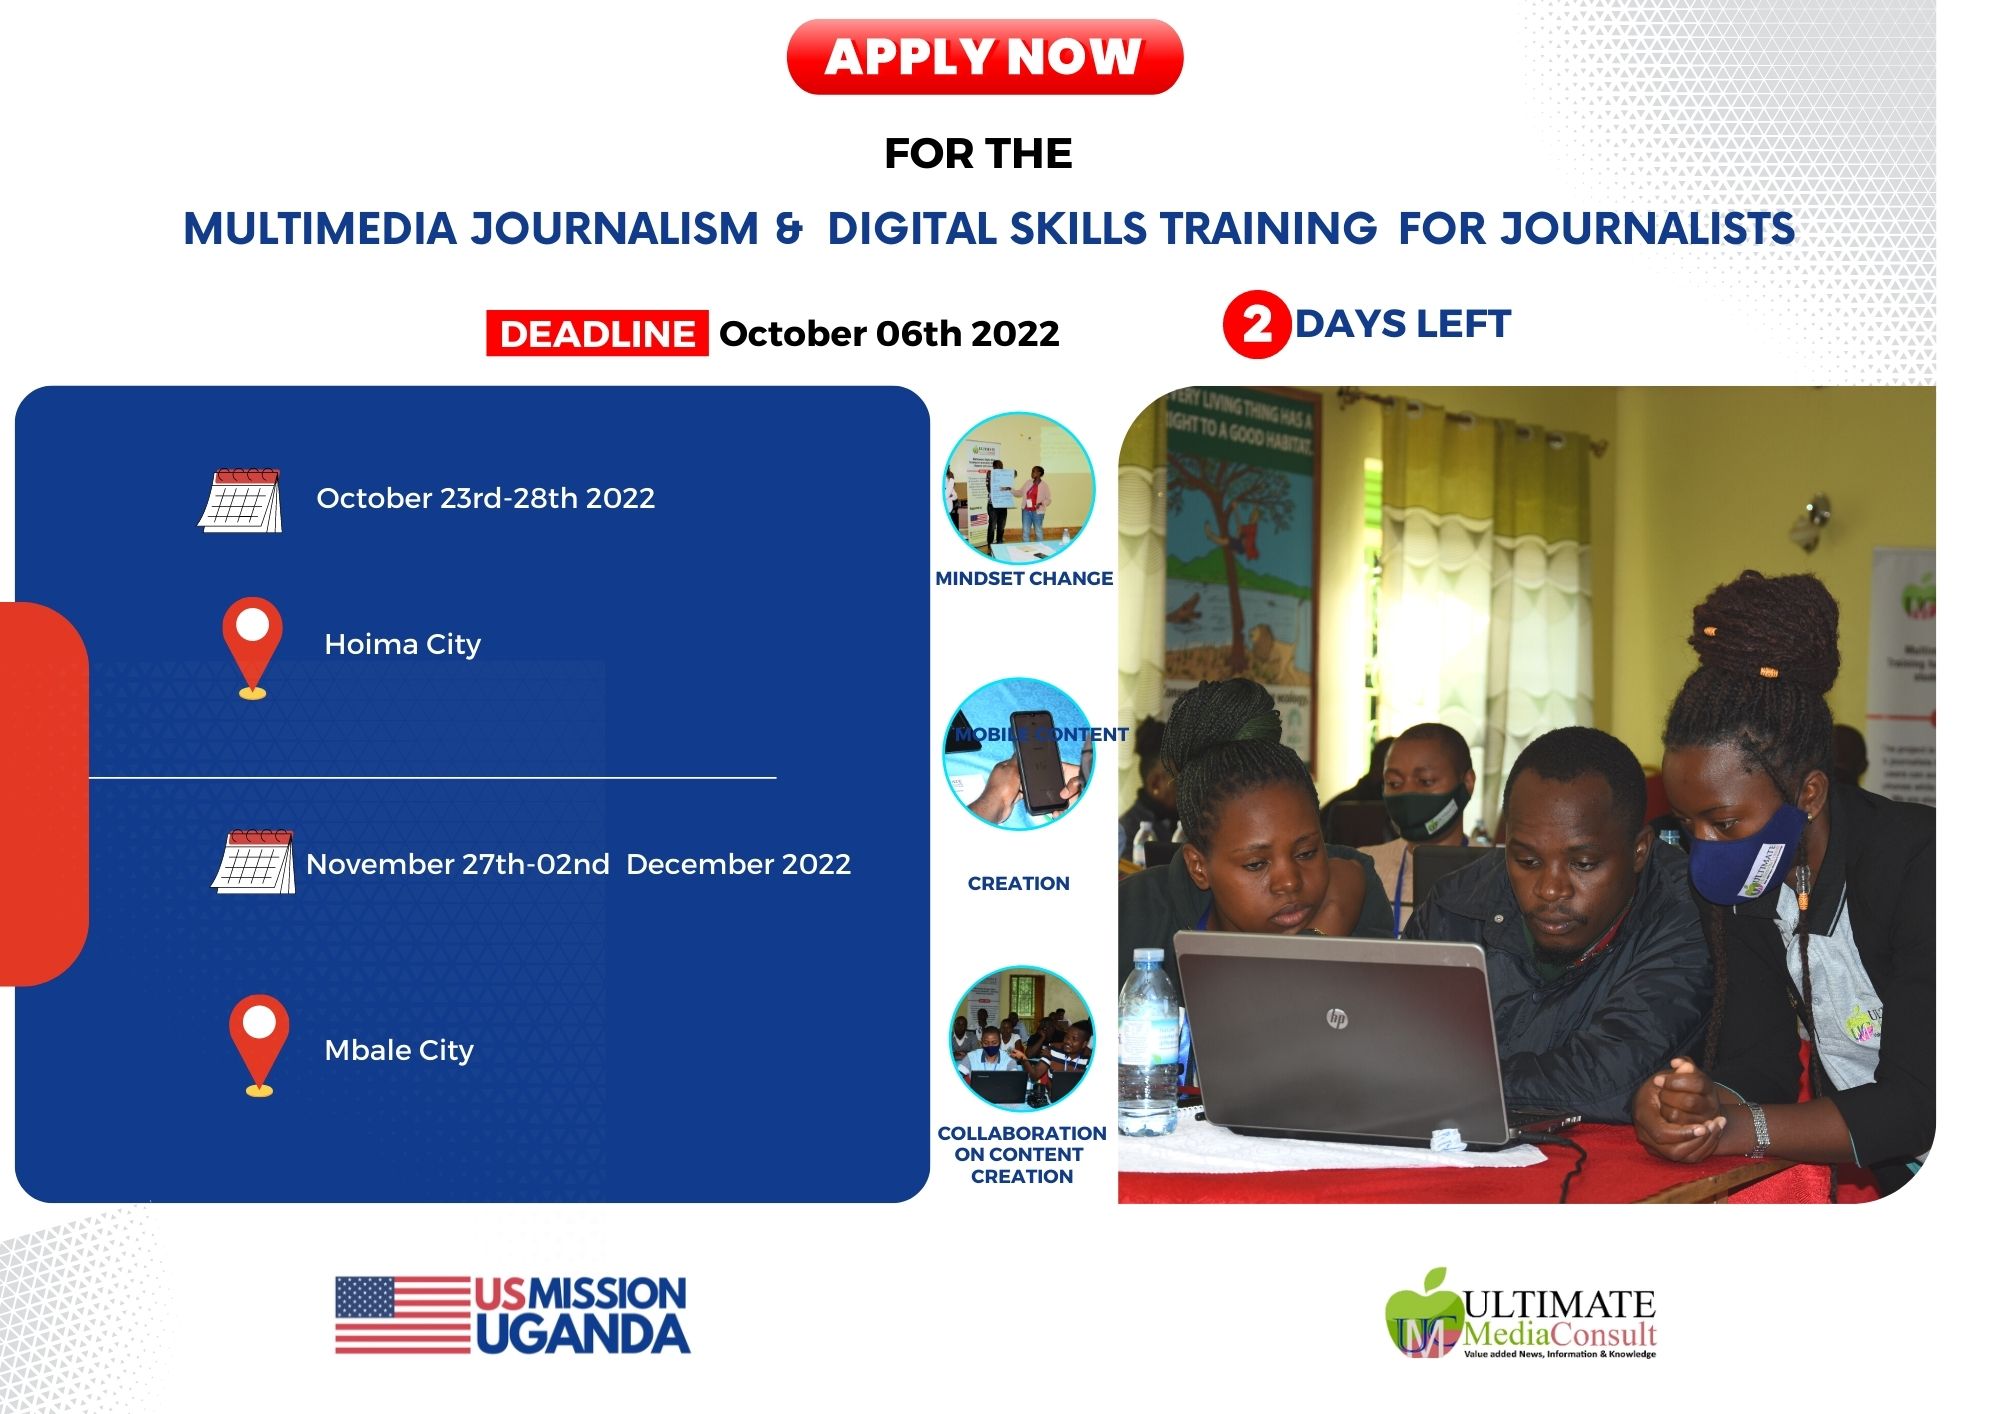 Applications Invited For Journalists To Be Trained In Multimedia Journalism and Digital Skills. 5